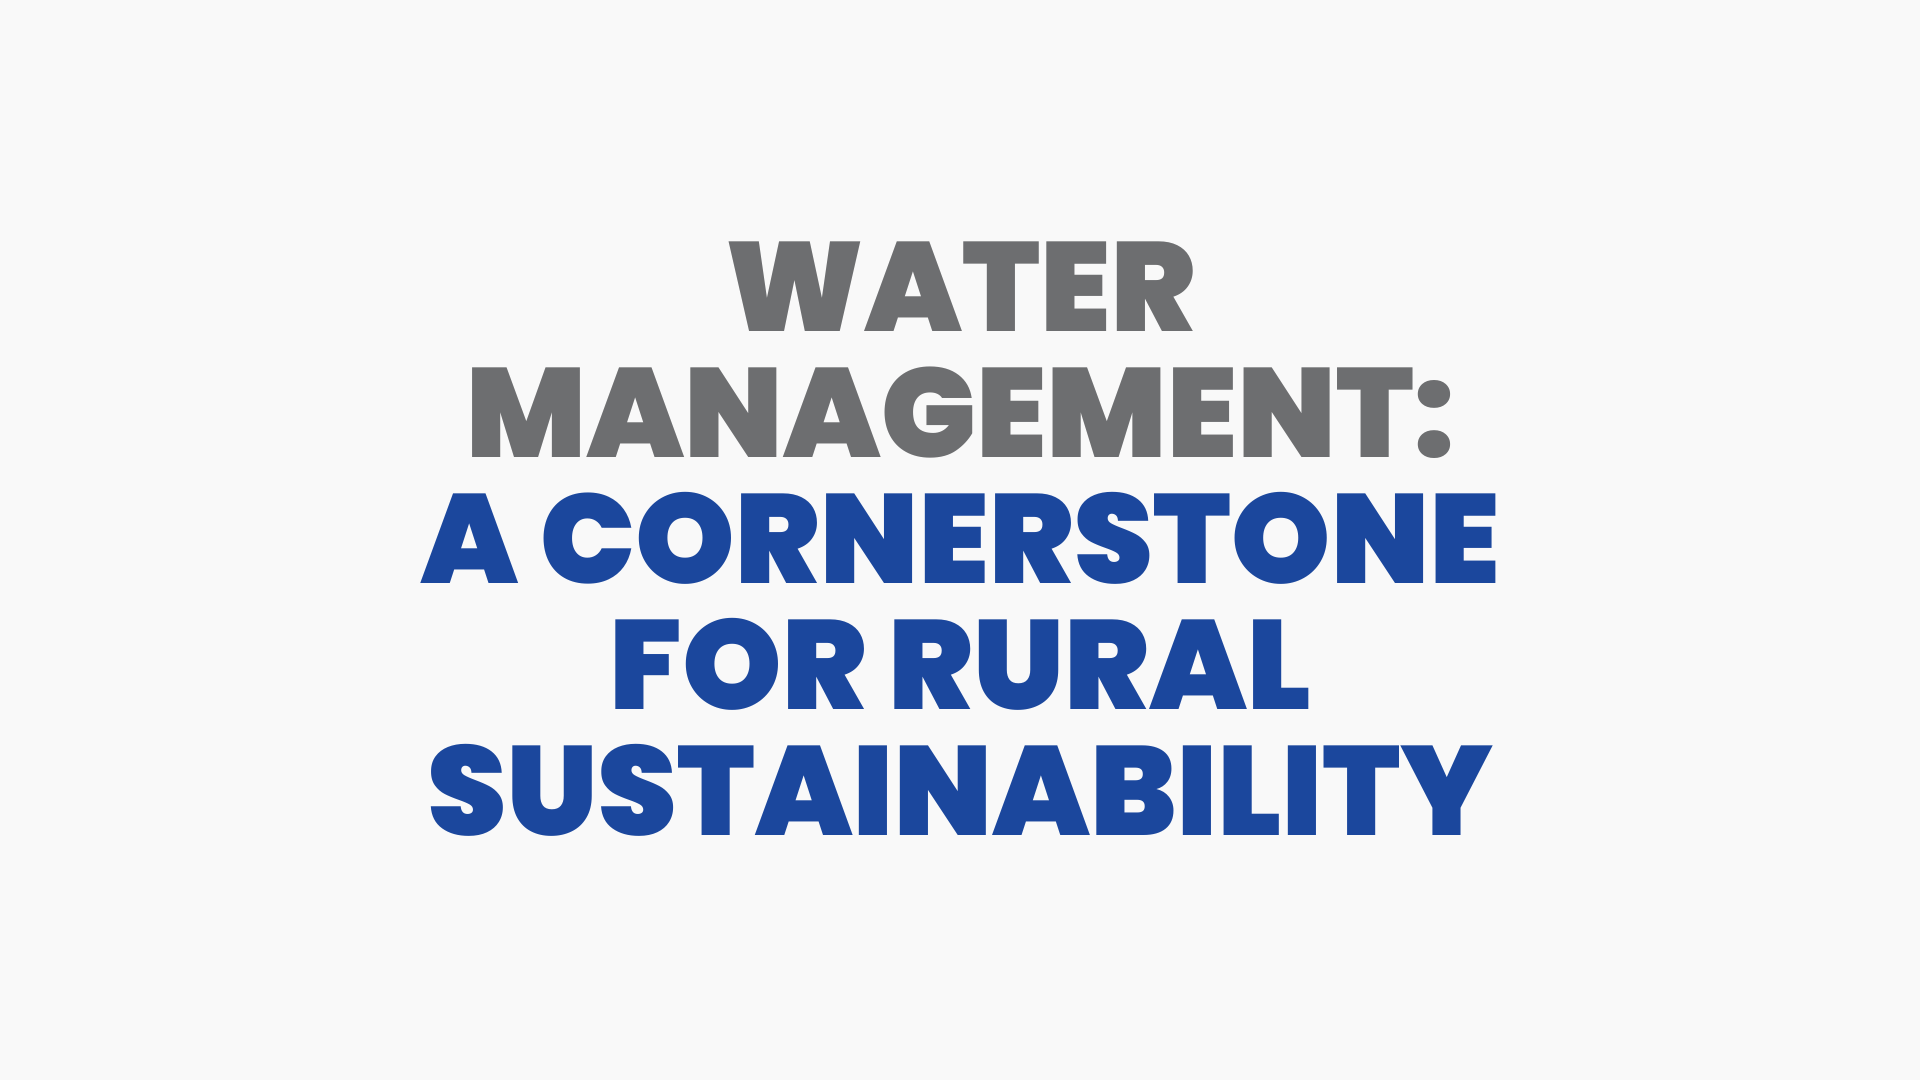 Water Management: A Cornerstone for Rural Sustainability